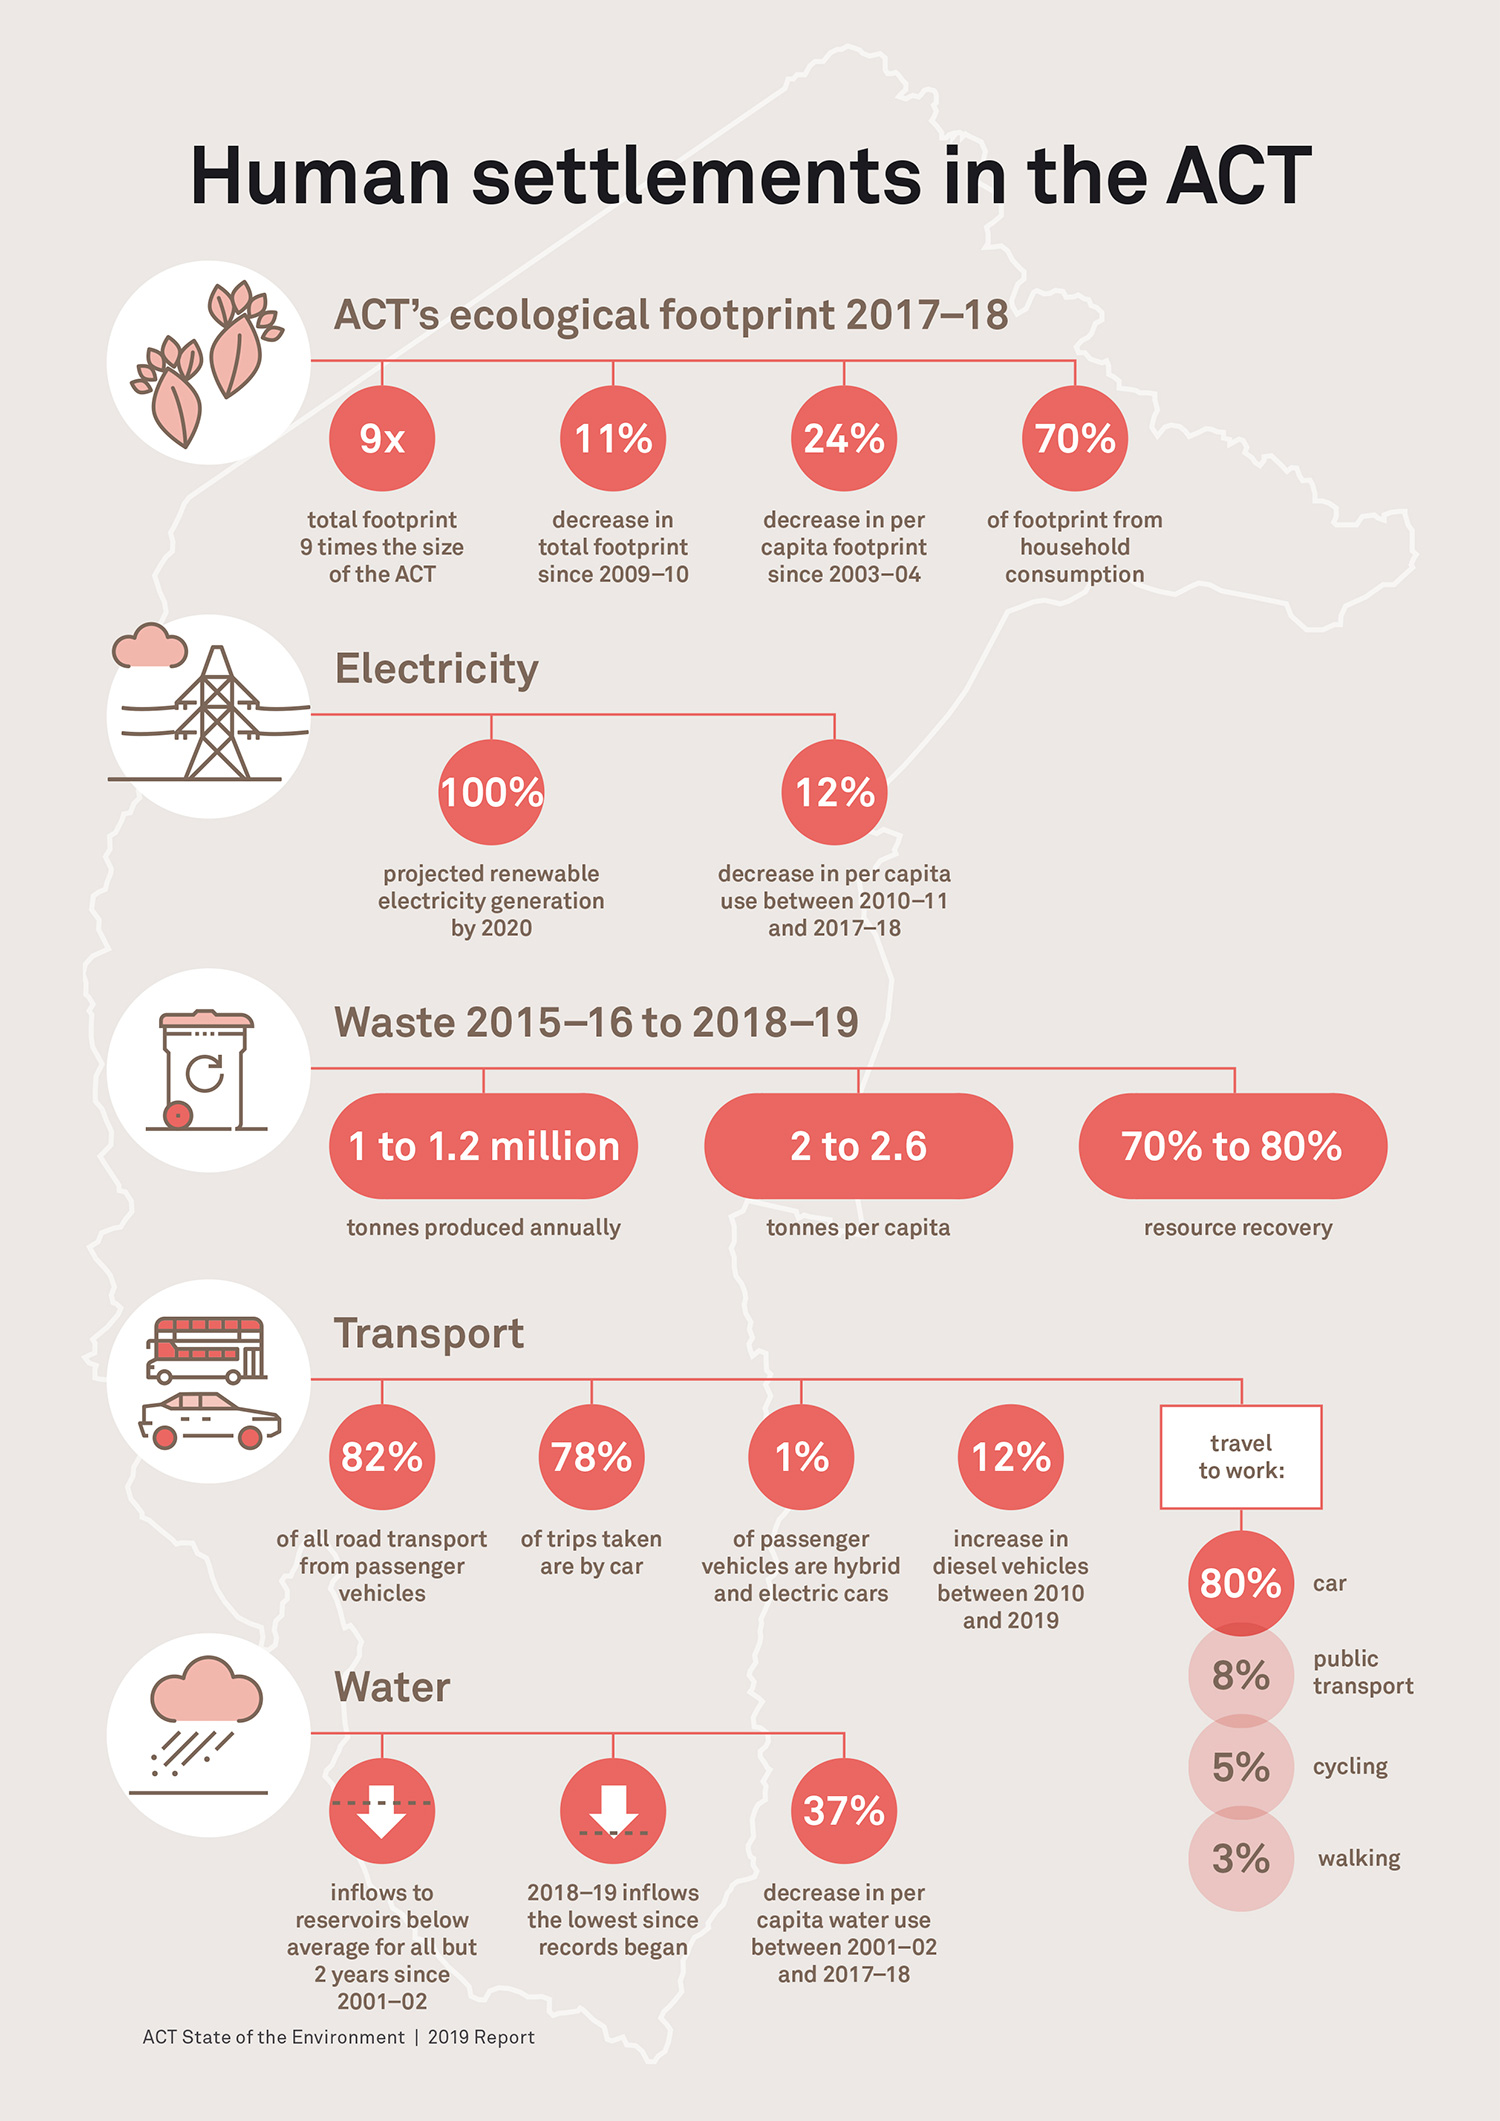 Human settlements in the ACT infographic. Explore the full information under 'data summaries'.